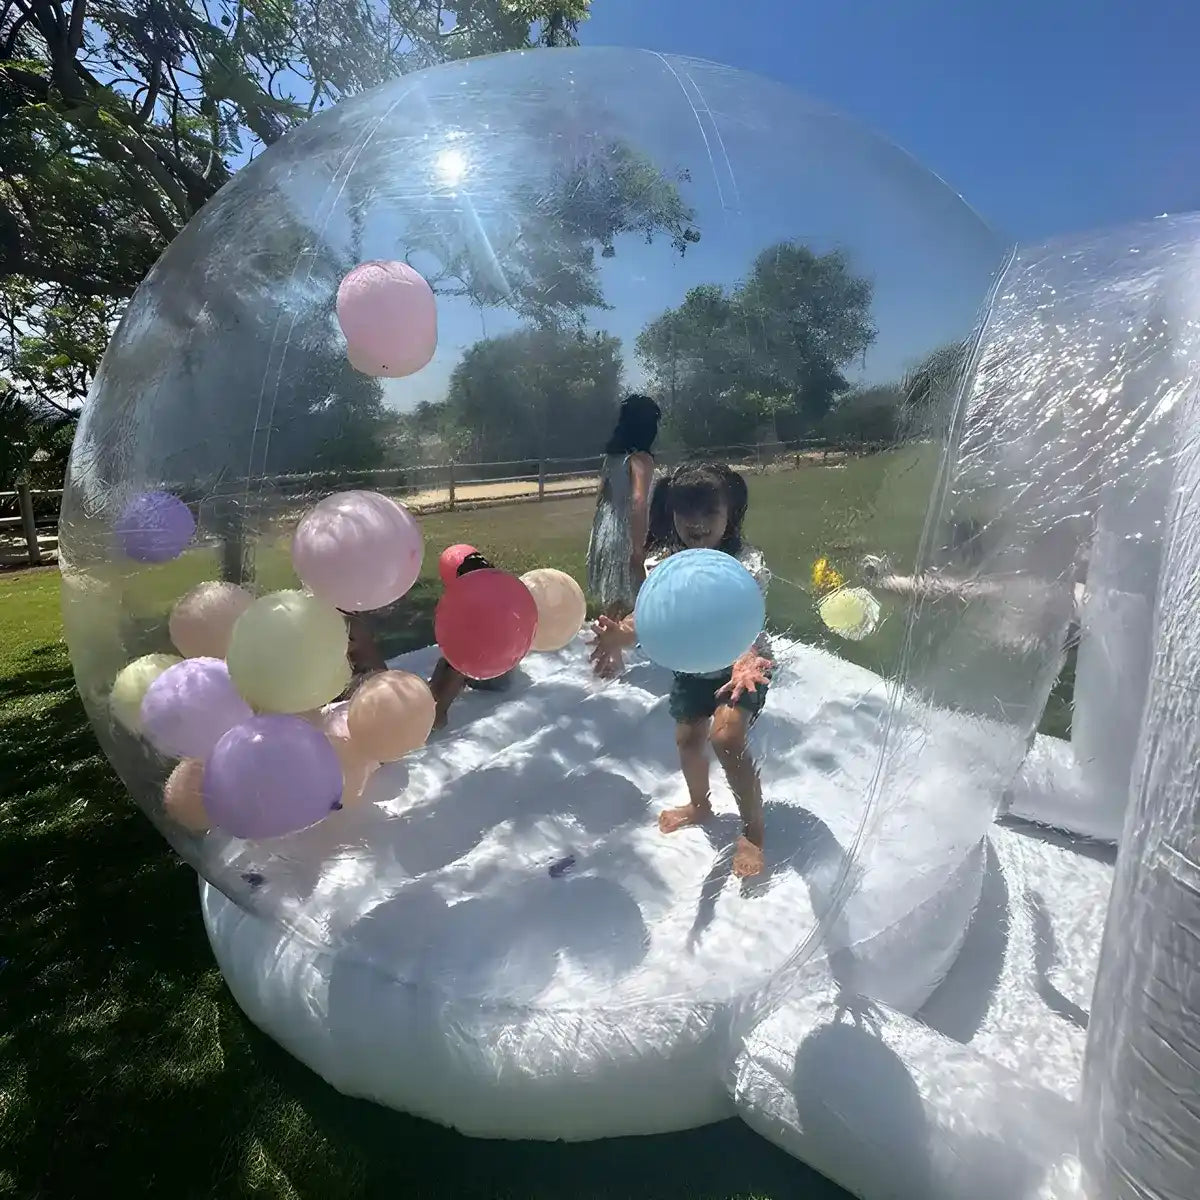 A close up shot into the bubble bounce house with kids playing with balloons